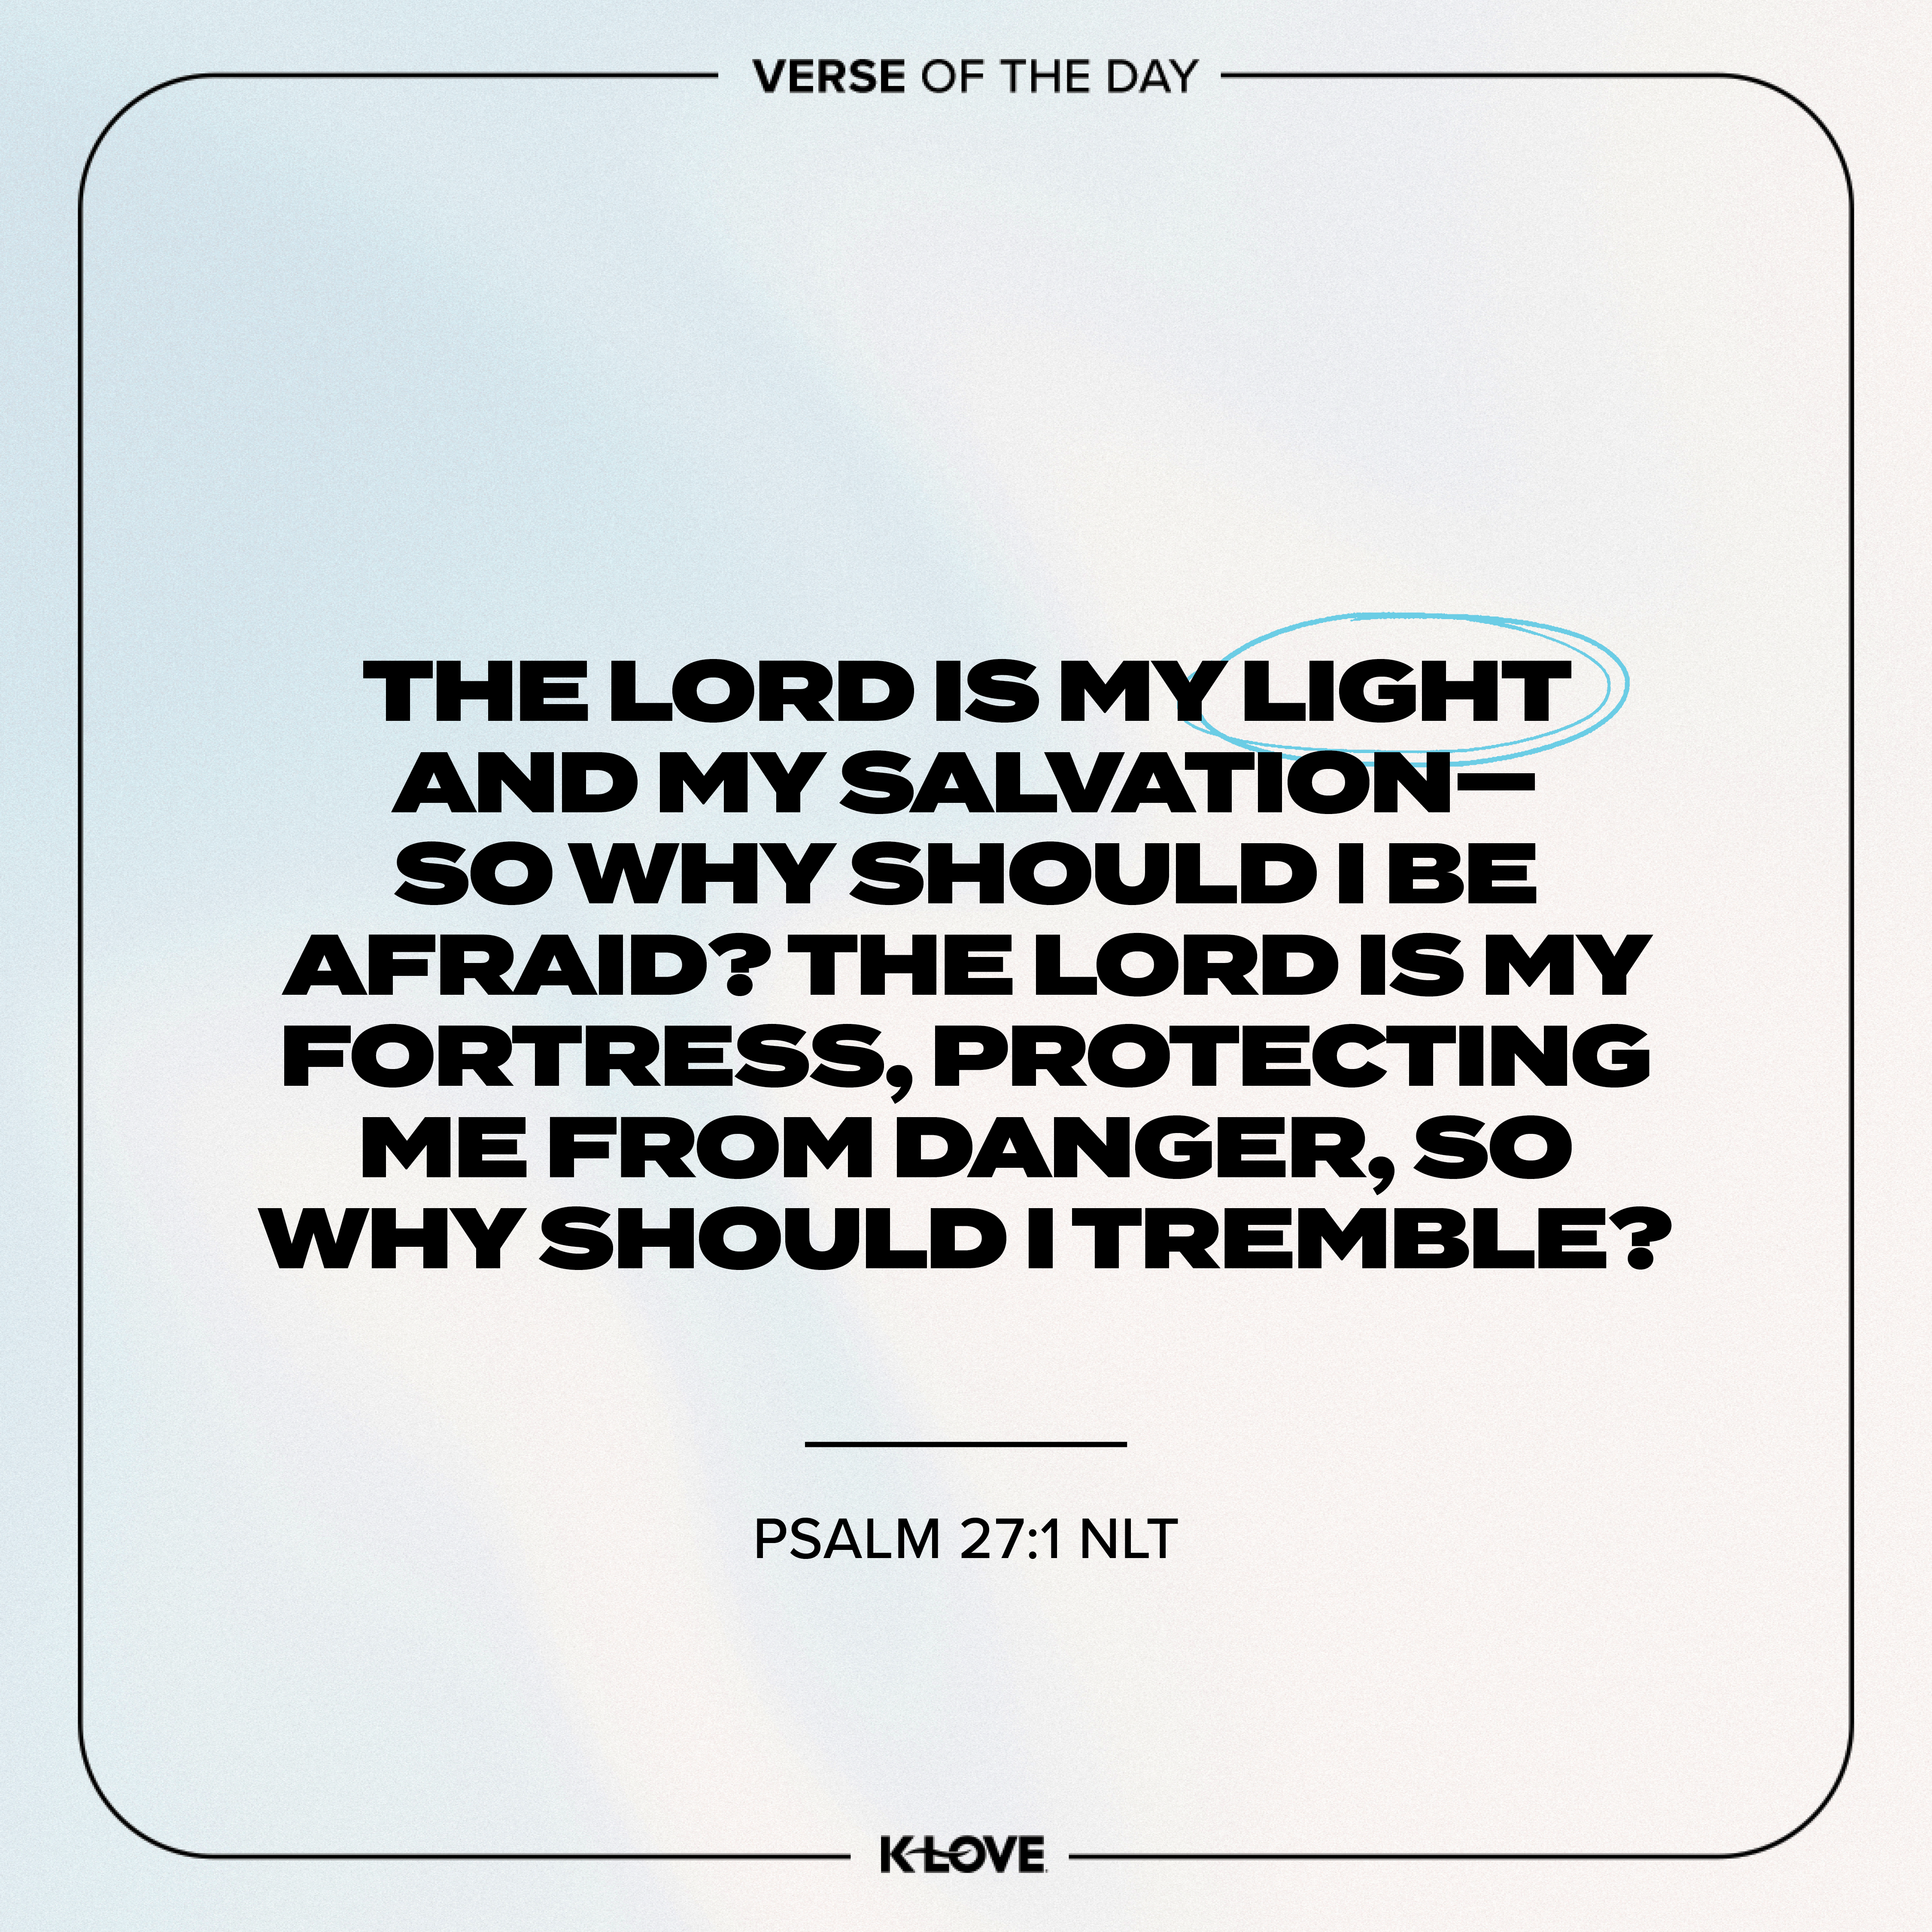 The LORD is my light and my salvation—so why should I be afraid? The LORD is my fortress, protecting me from danger, so why should I tremble?